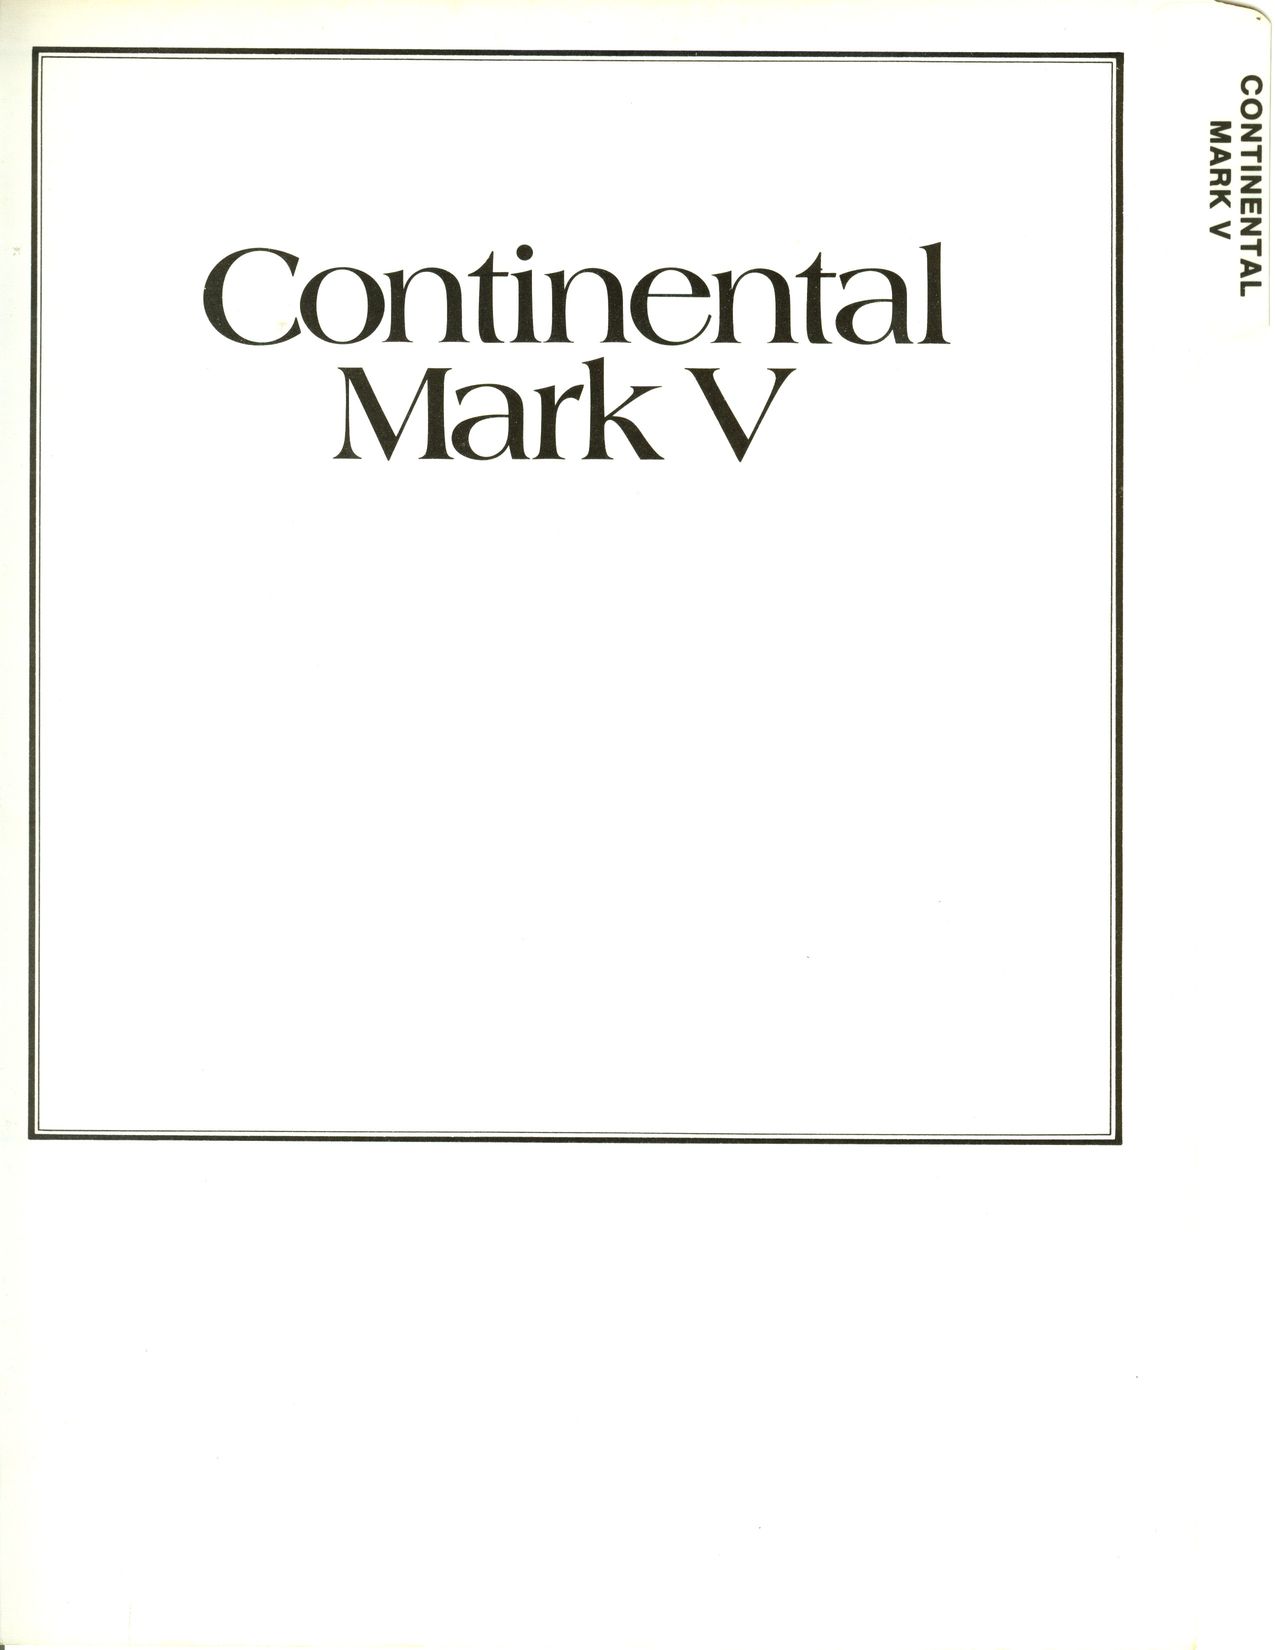 1977 Continental Product Facts Book-1-00